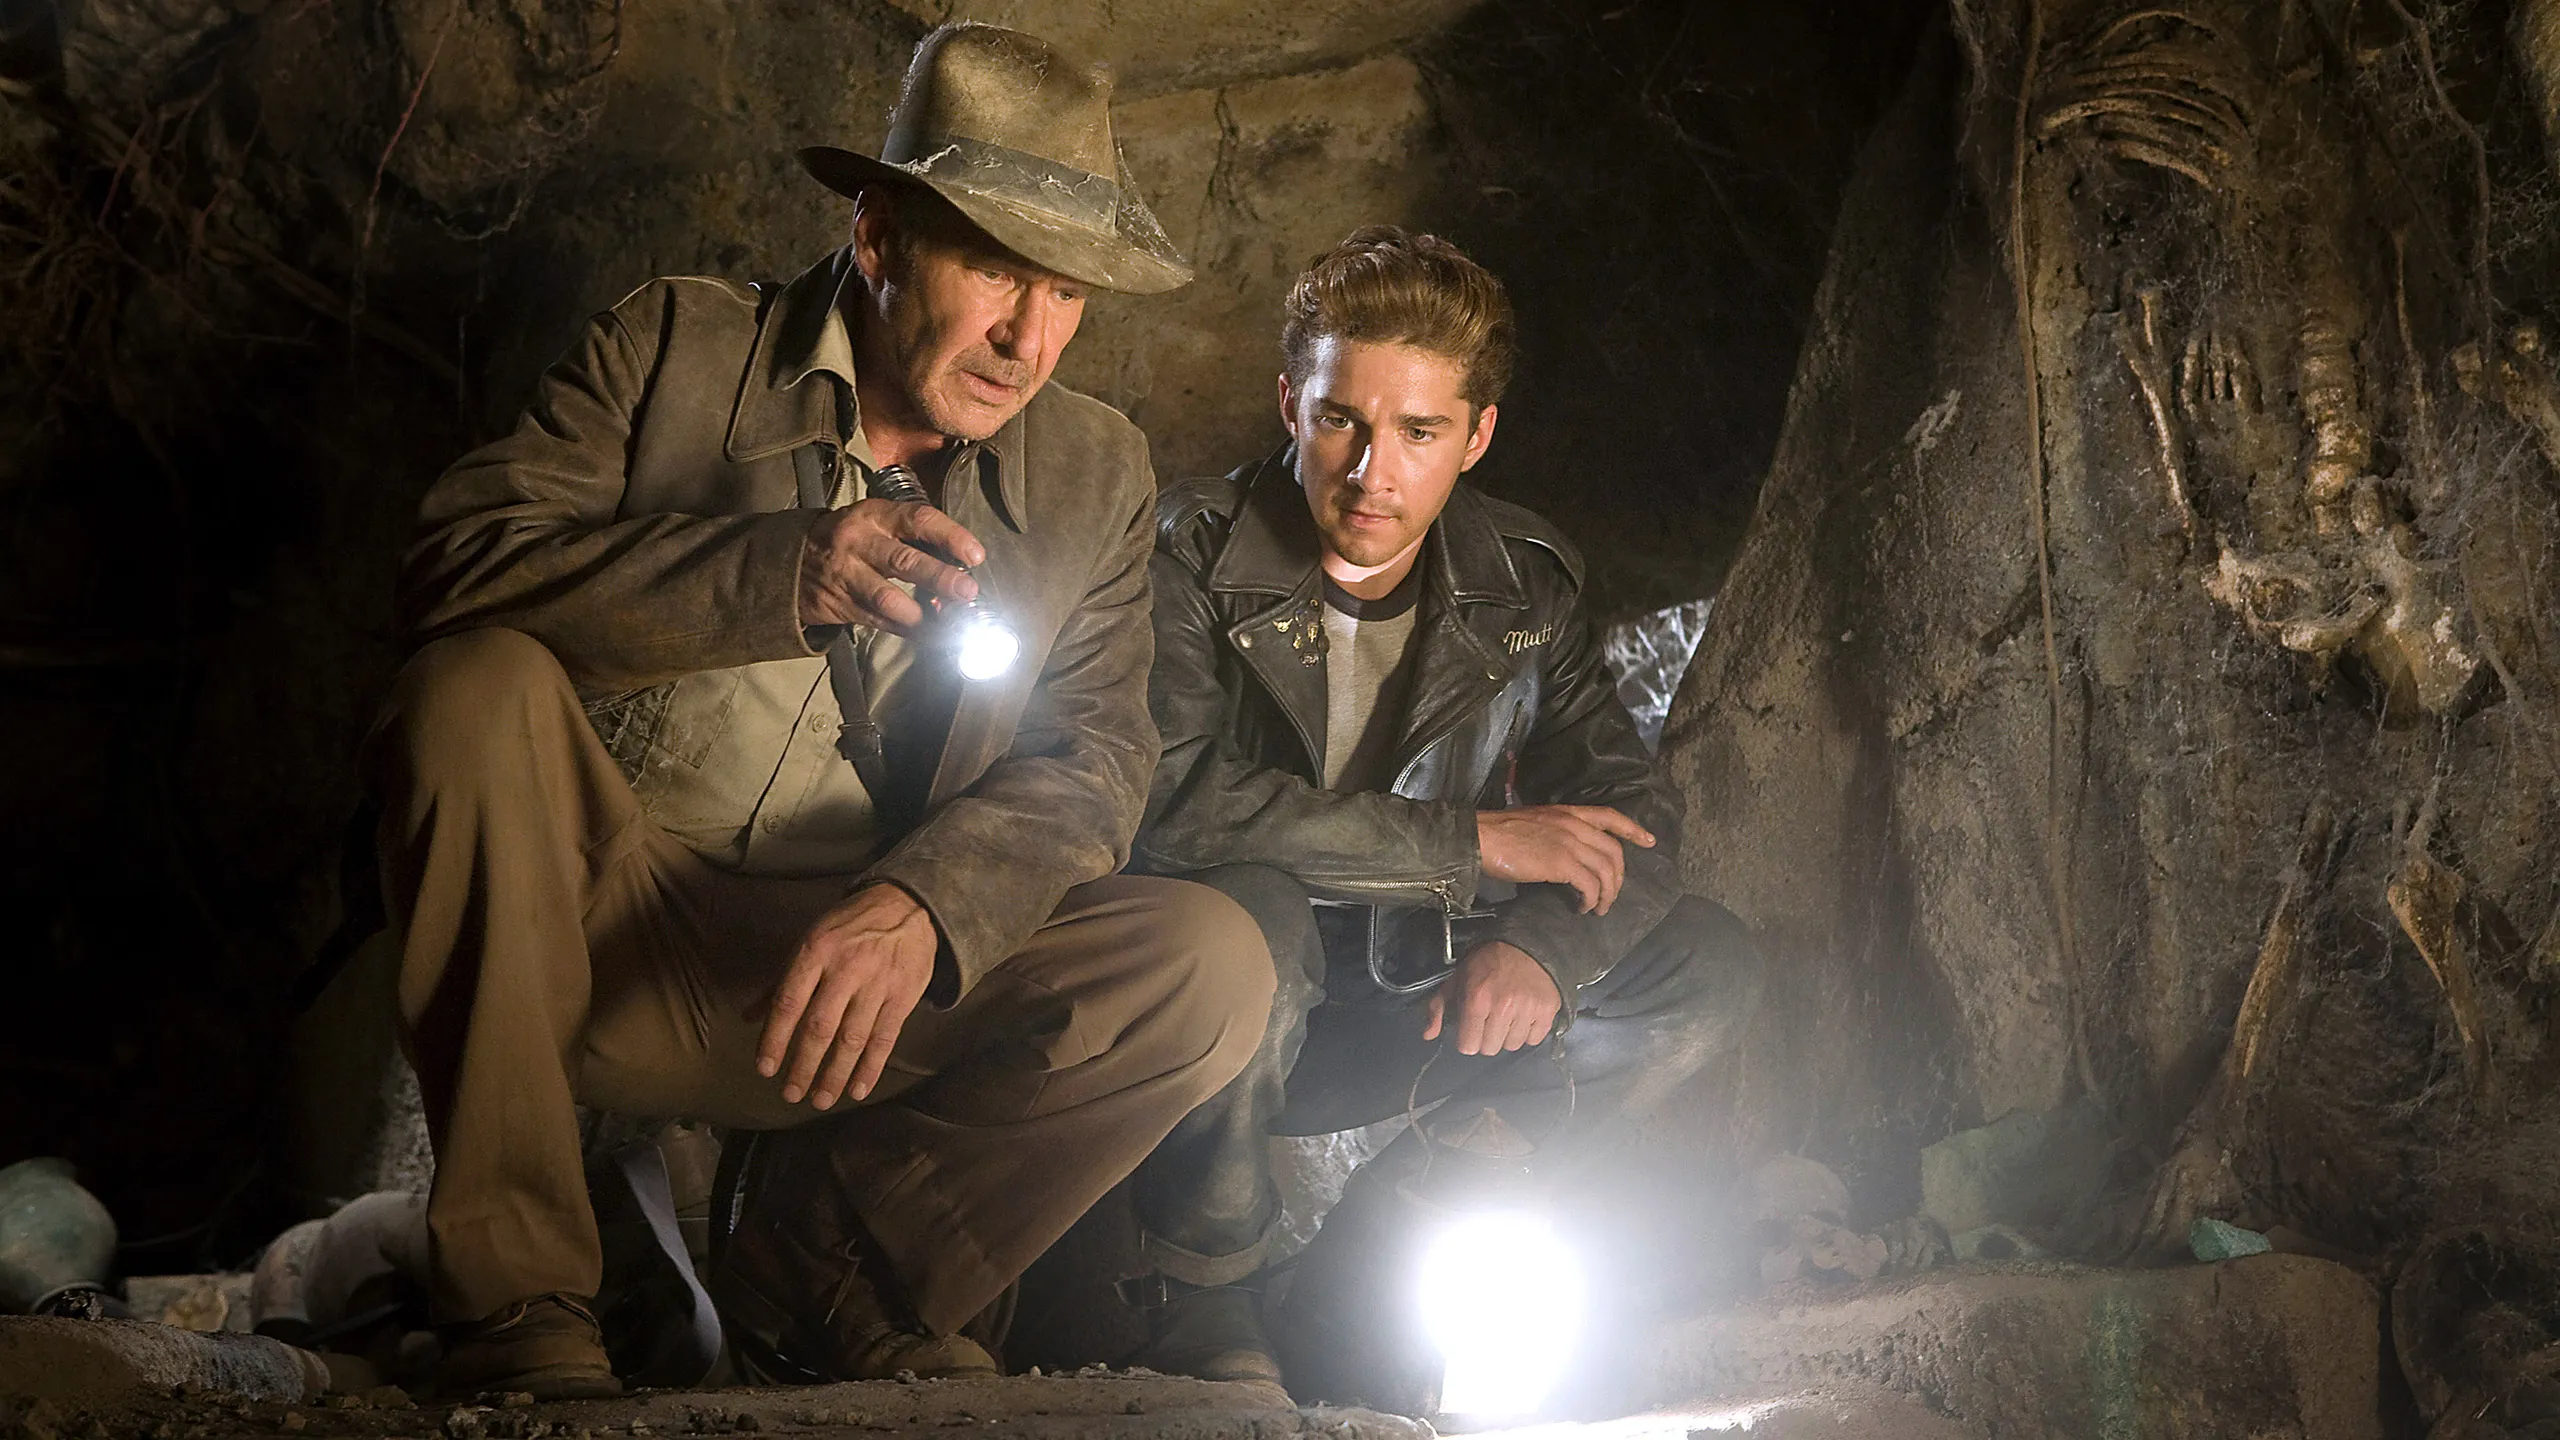 Harrison Ford and Shia LaBeouf in a still from Indiana Jones and The Kingdom of The Crystal Skull